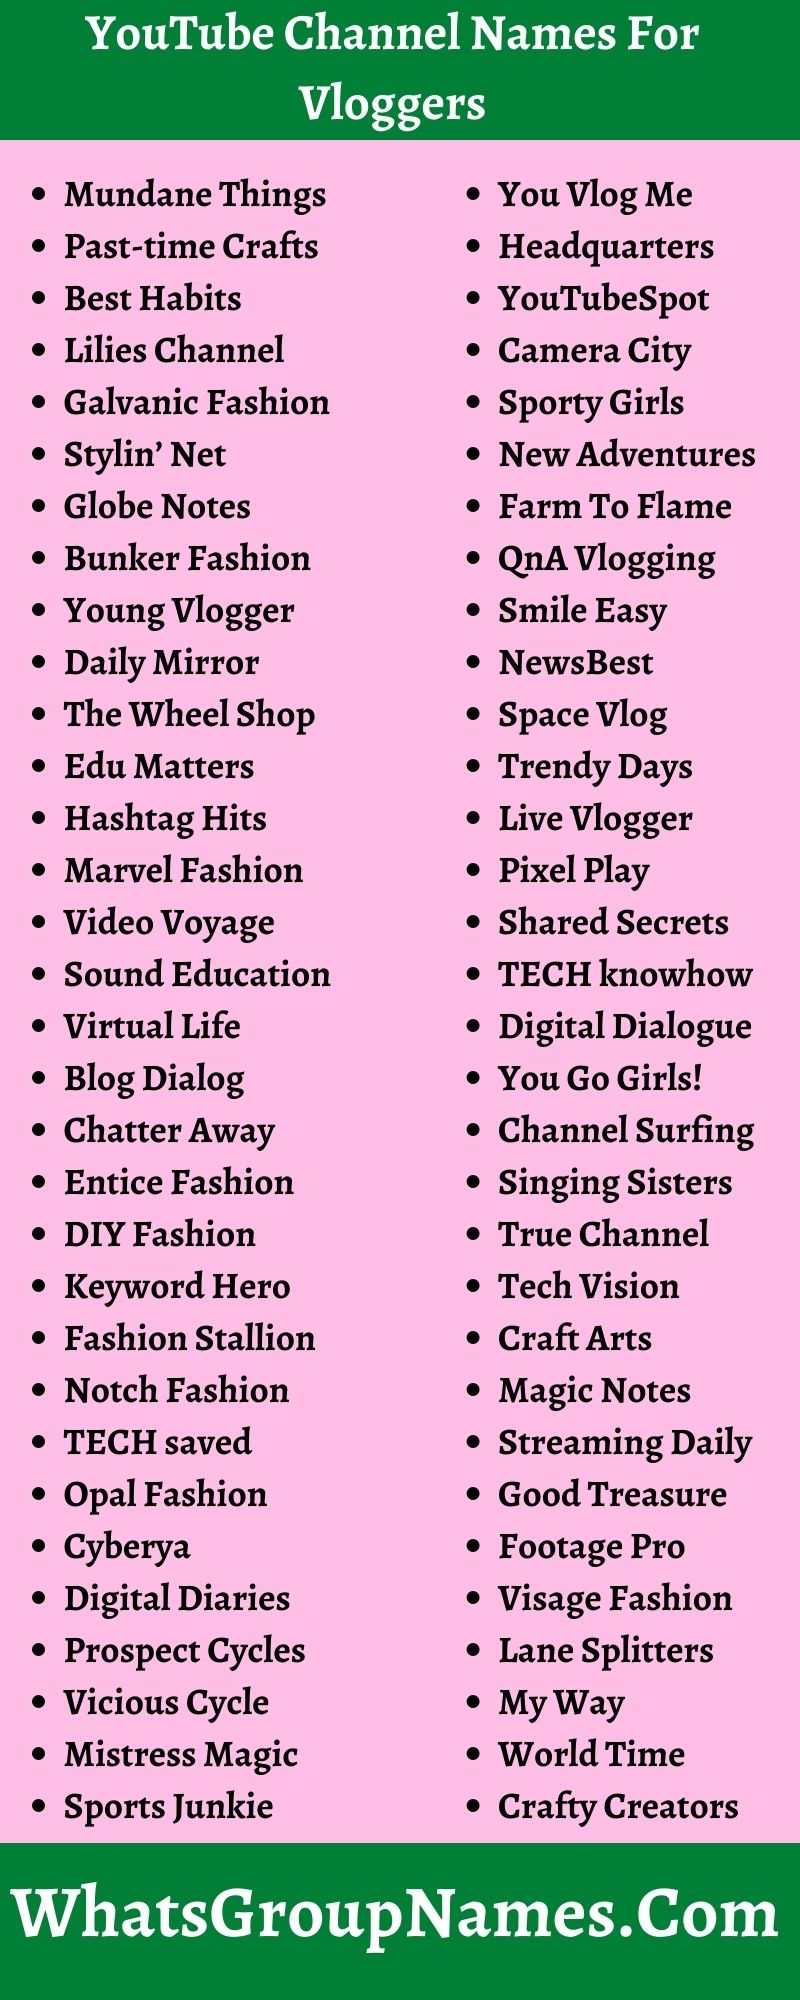 267+ YouTube Channel Names For Vloggers